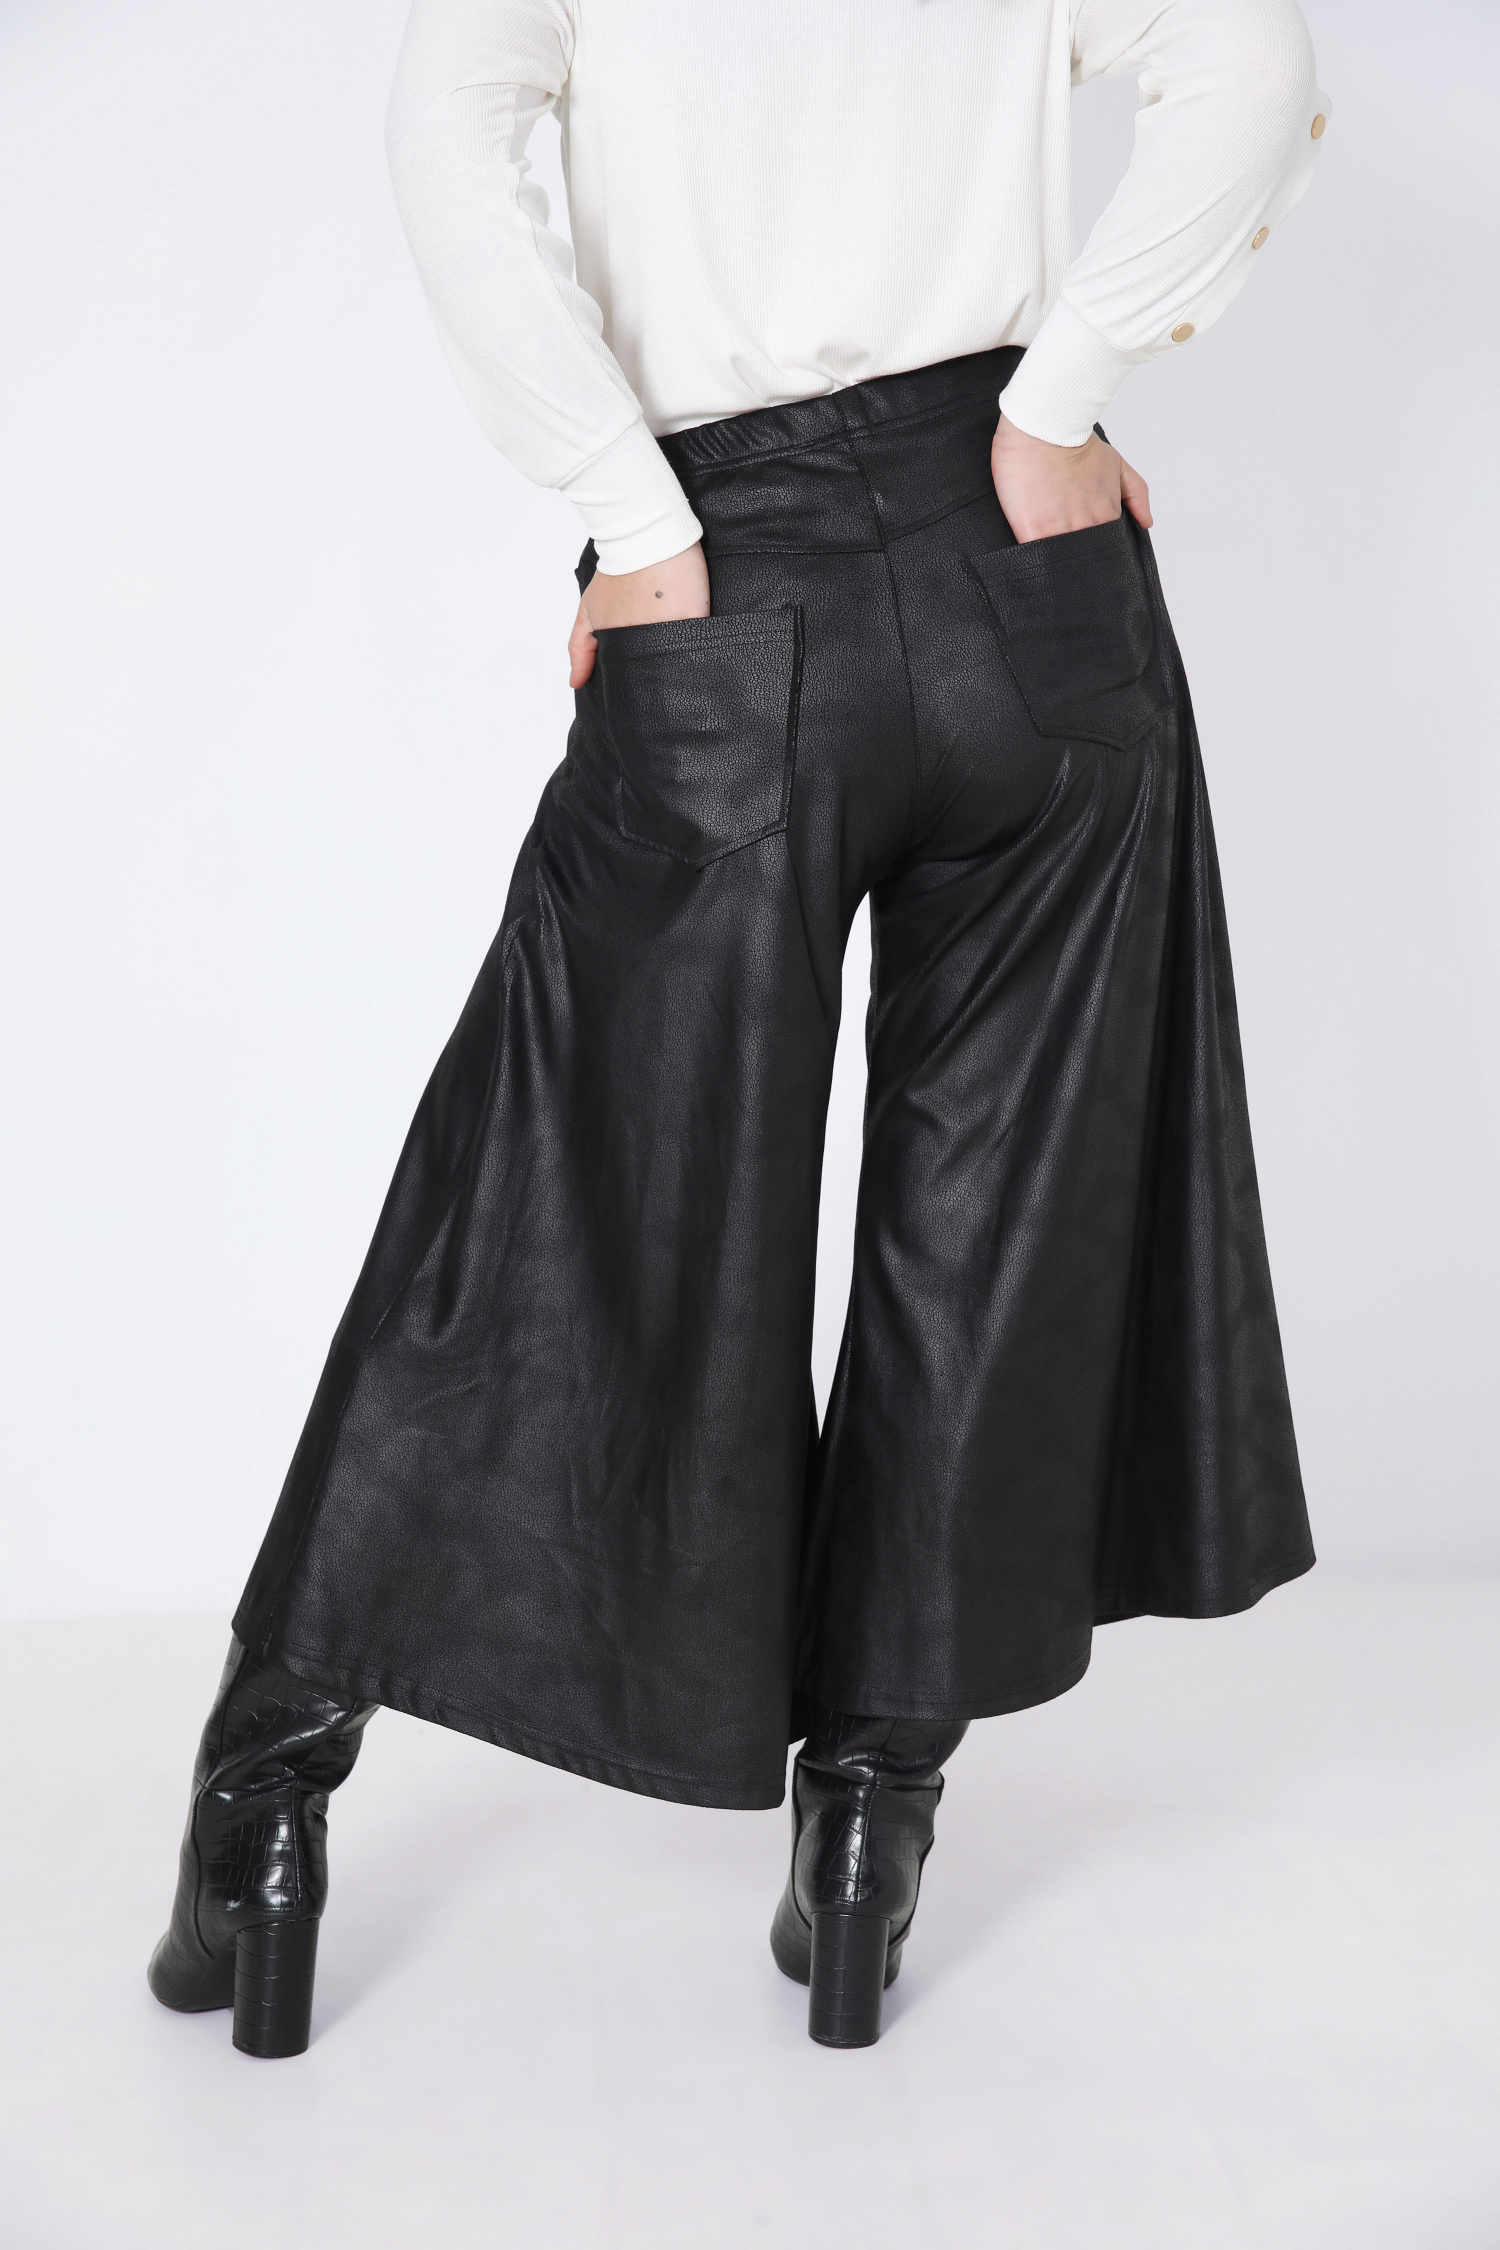 Faux leather culotte skirt